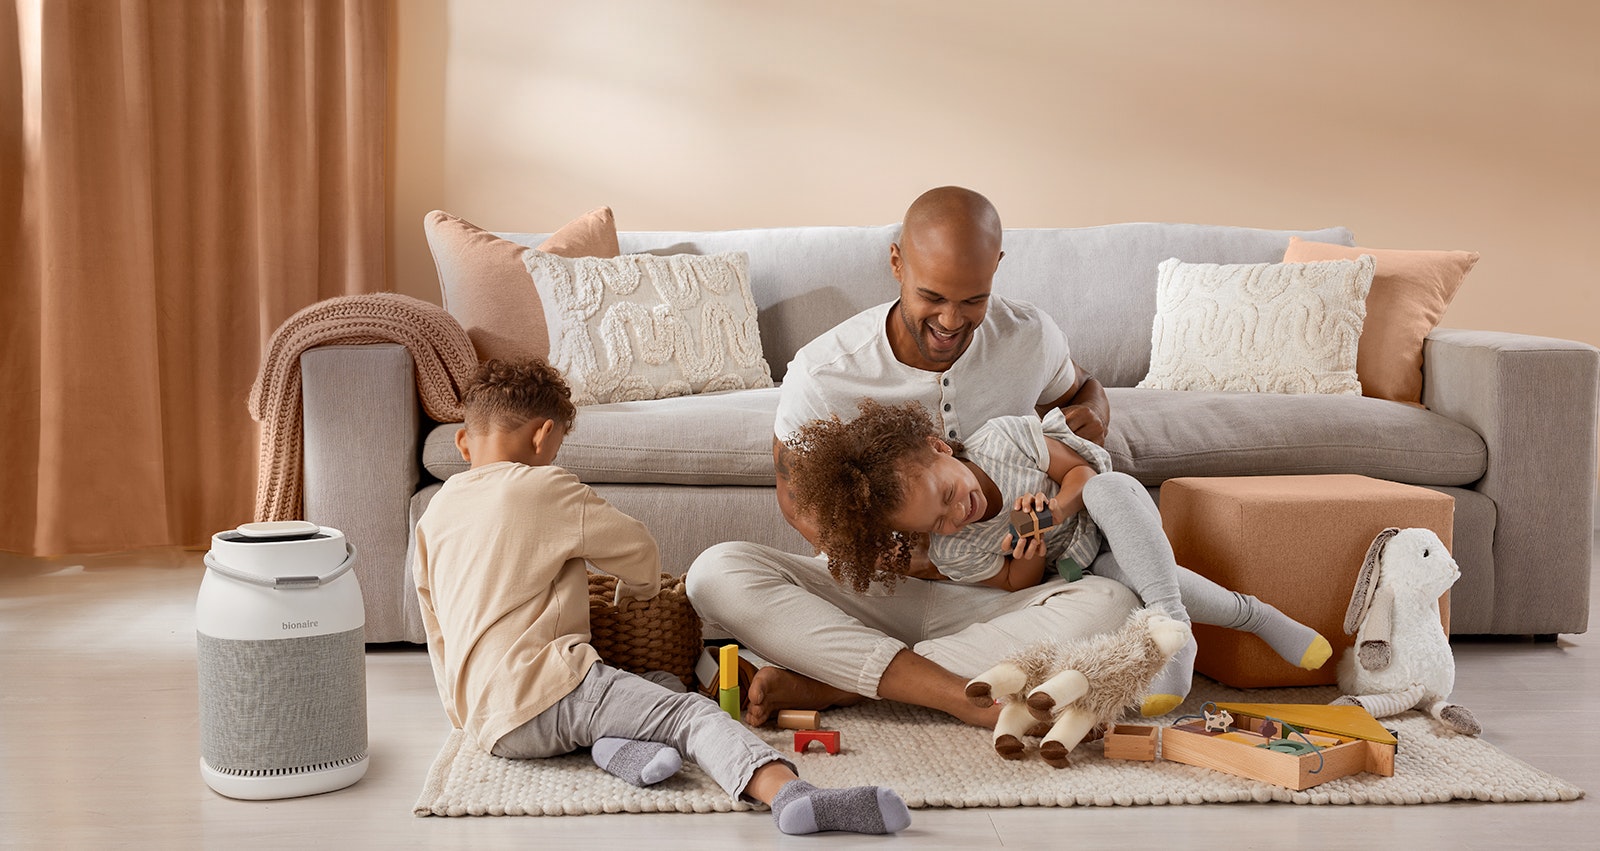 Black father and two multi-racial children playing in front of a couch. Air purifier on floor.